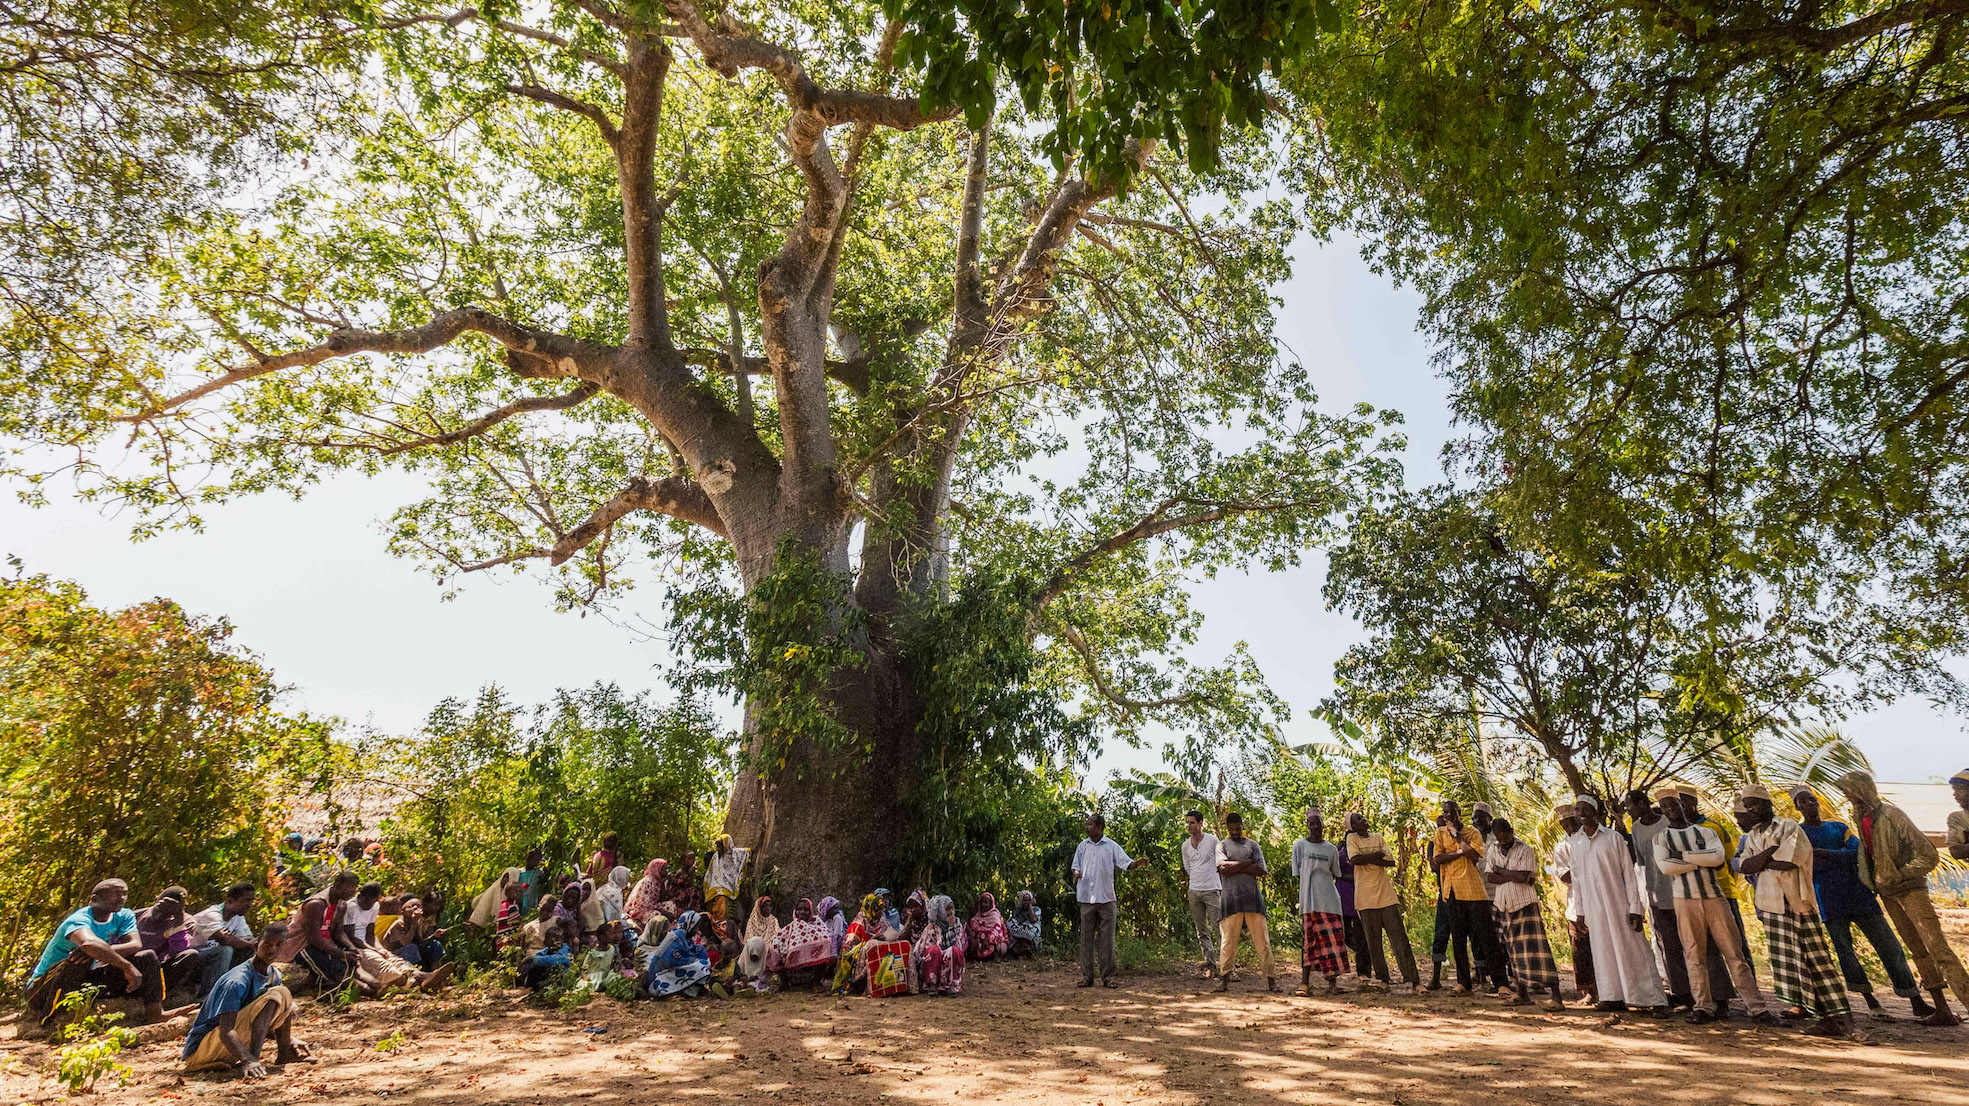 The community in Pemba gathers under a tree in the shade.